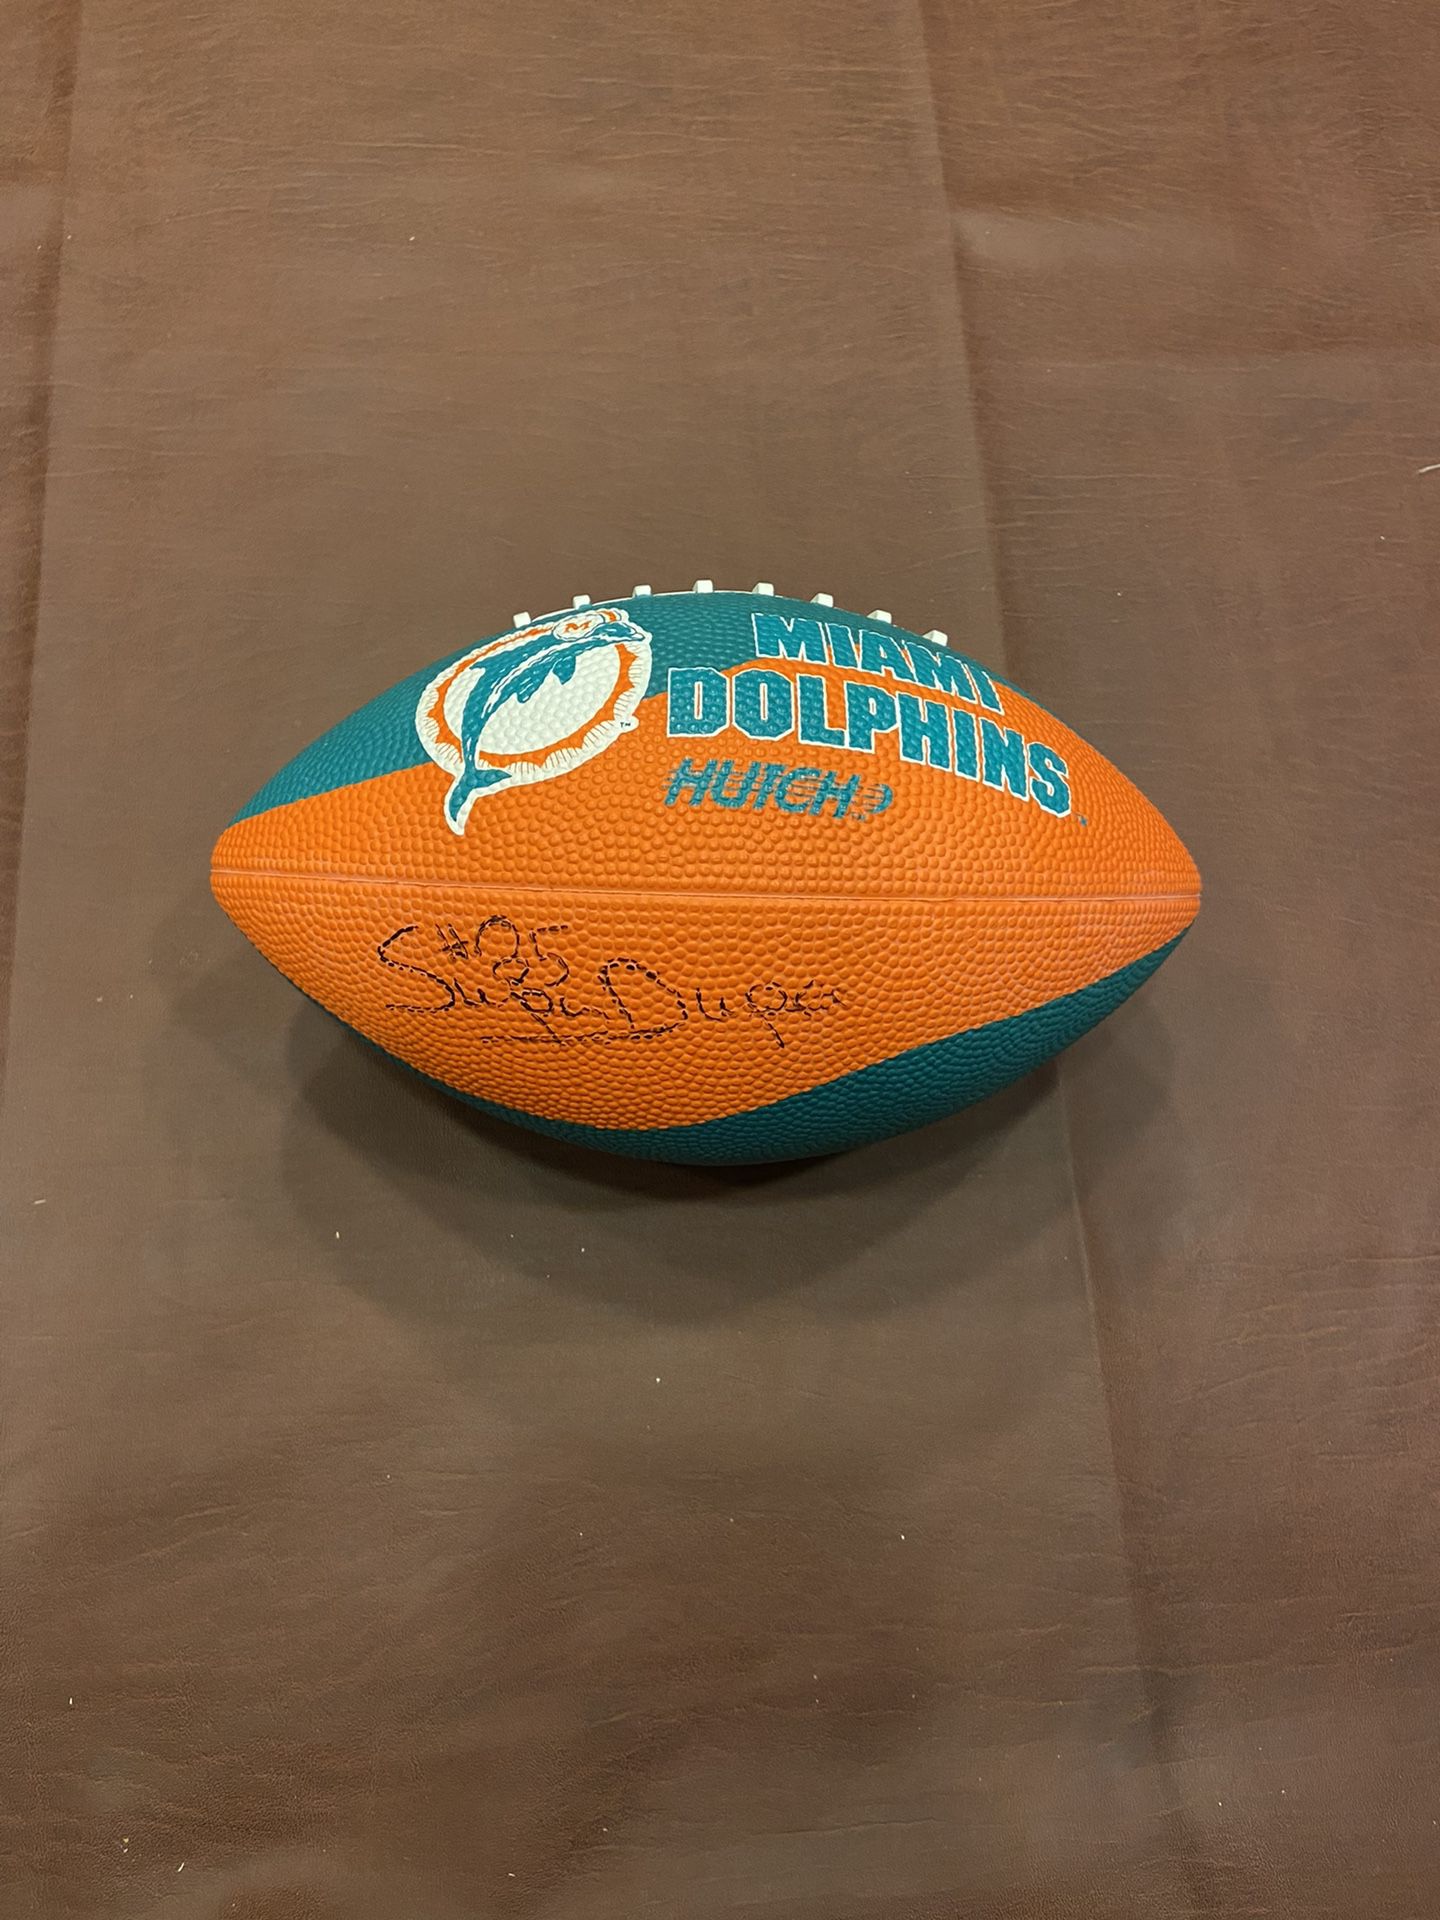 Miami Dolphins Football Signed By Mark Duper